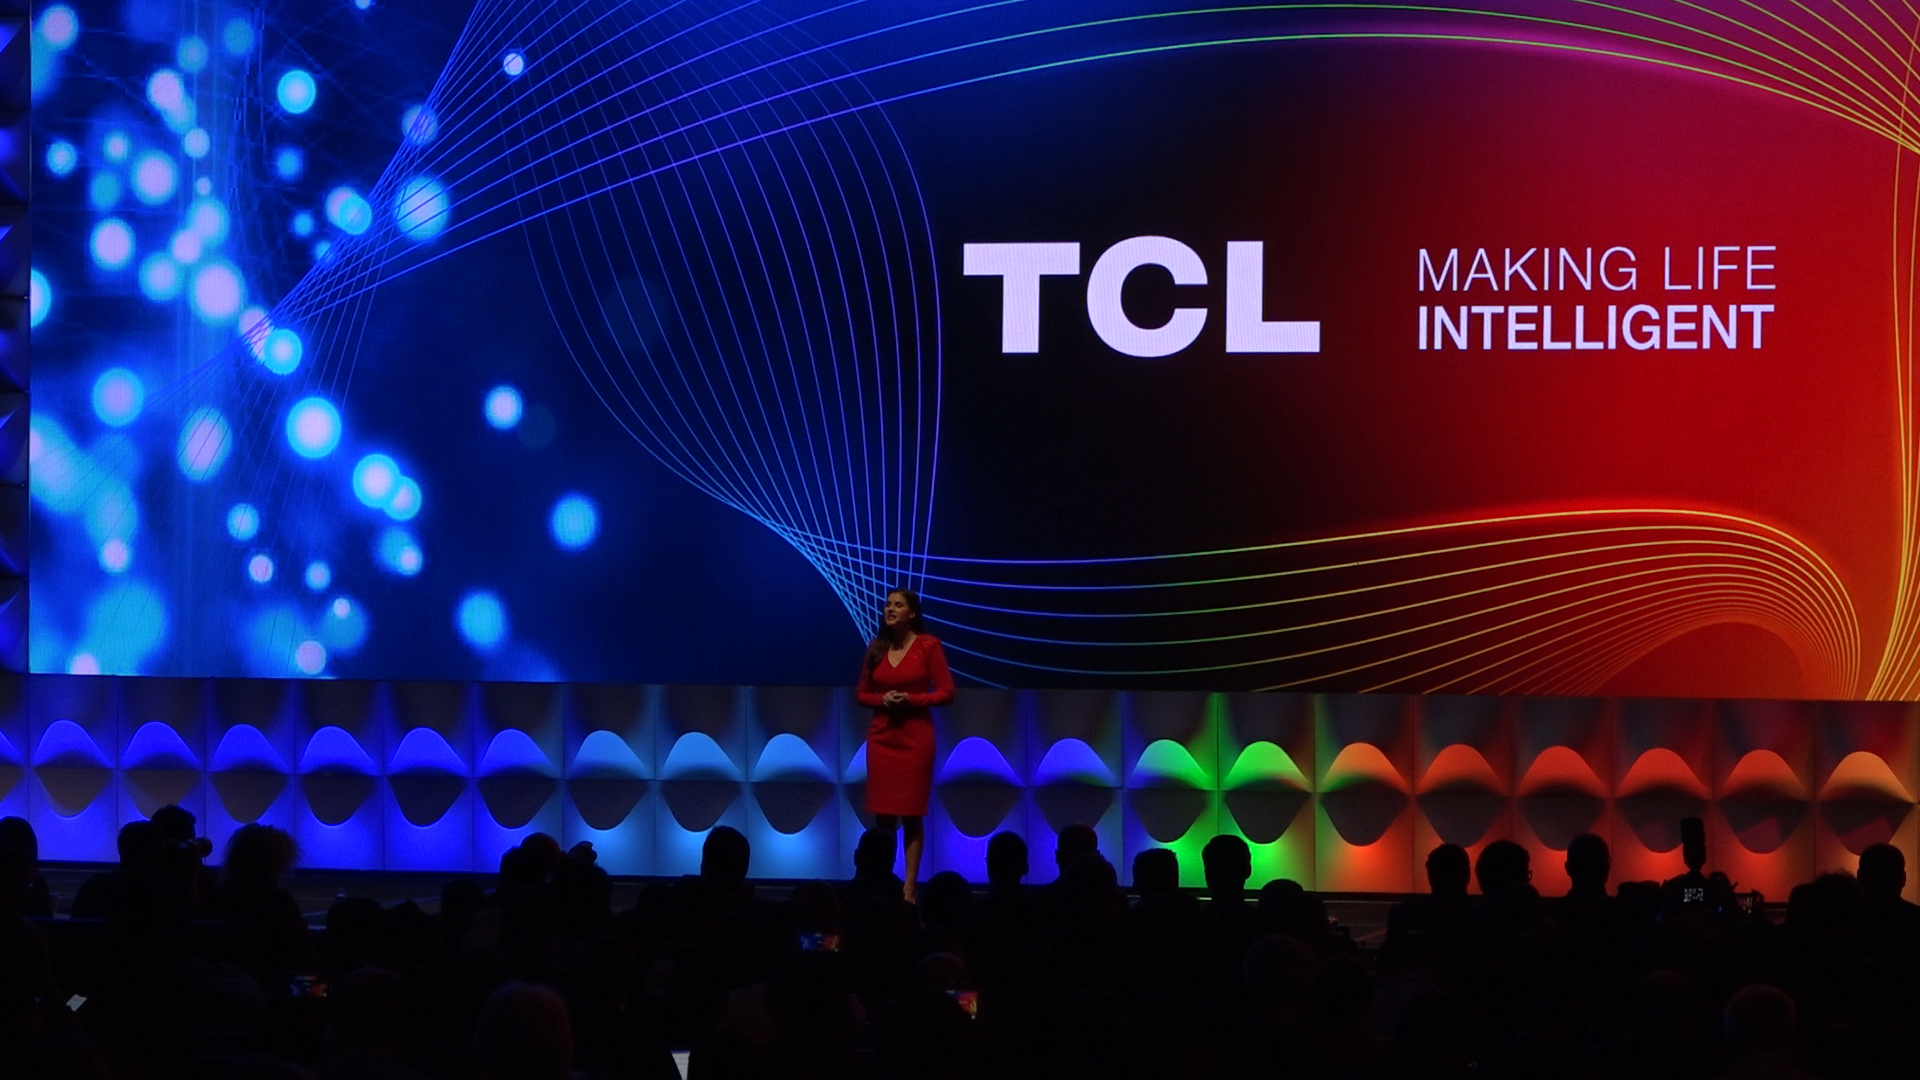 TCL presents its latest trends, new products and technologies at CES 2019